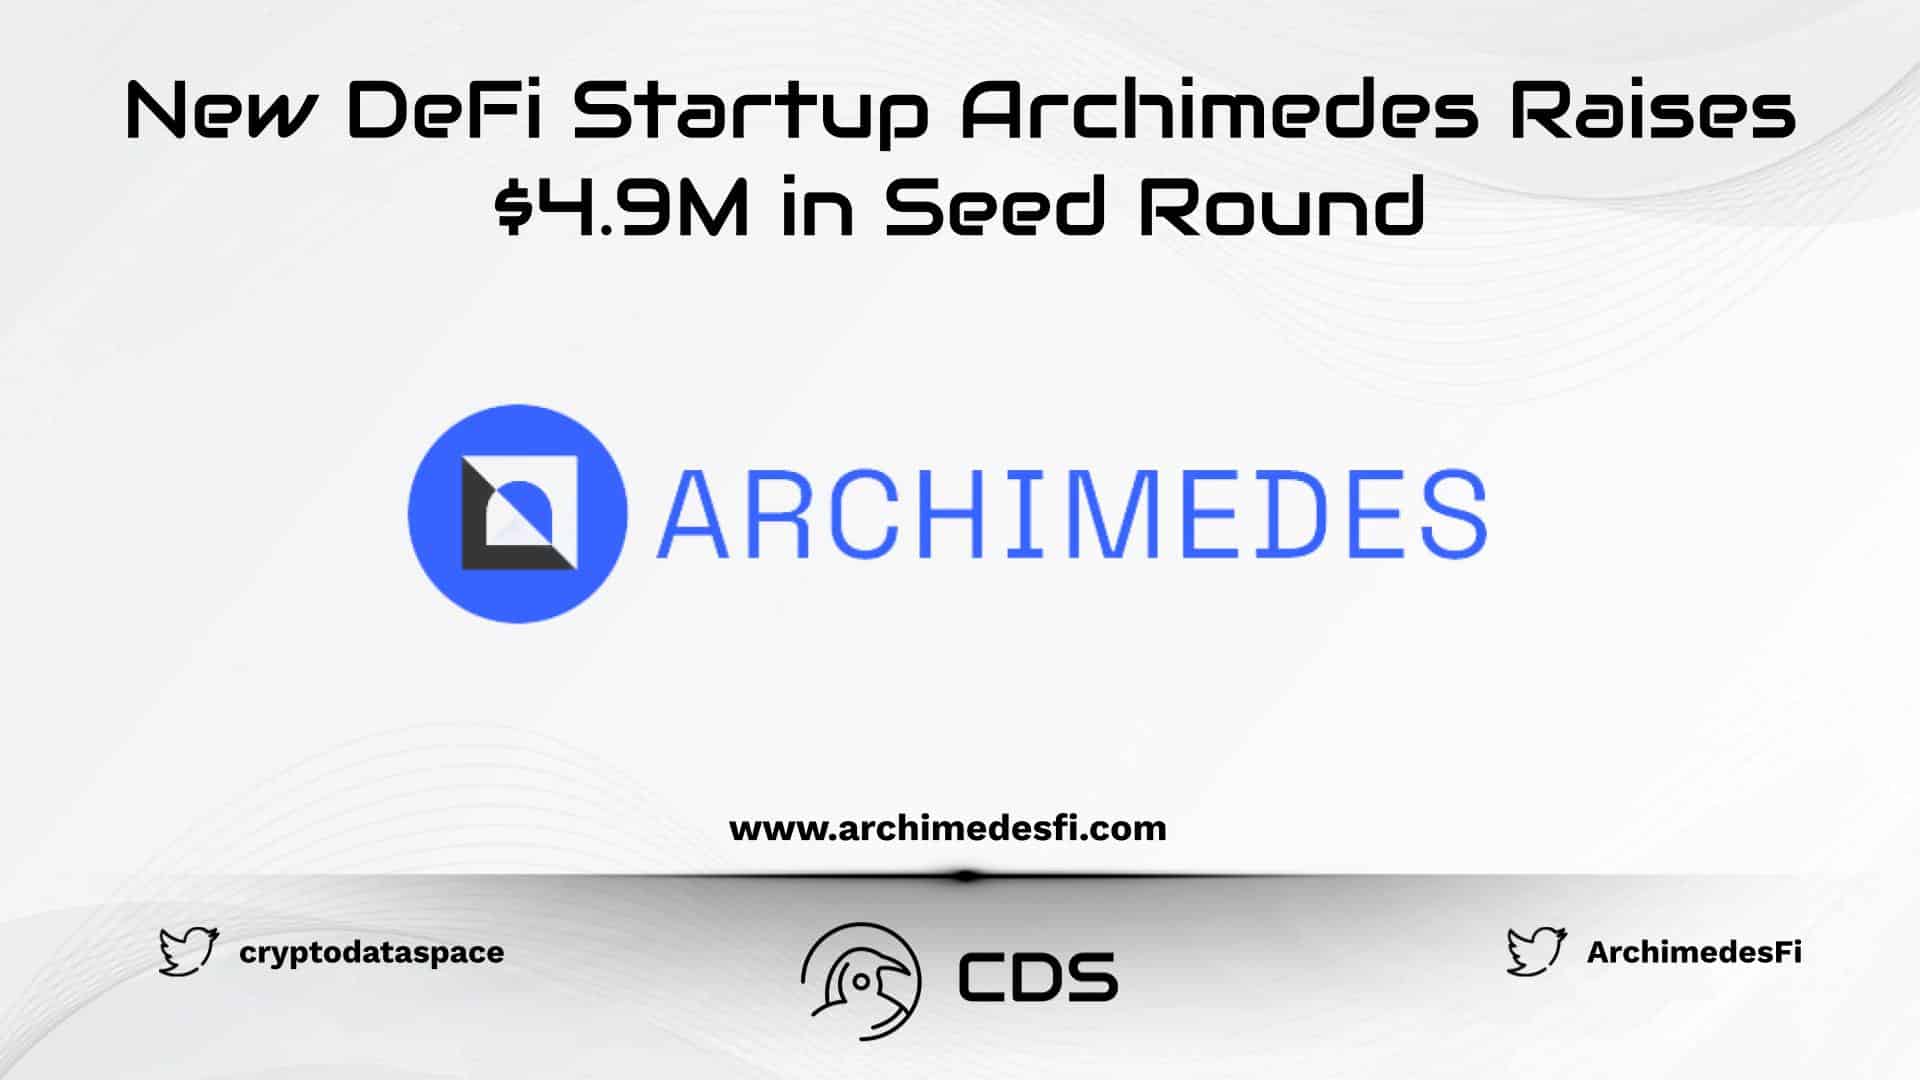 New DeFi Startup Archimedes Raises $4.9M in Seed Round